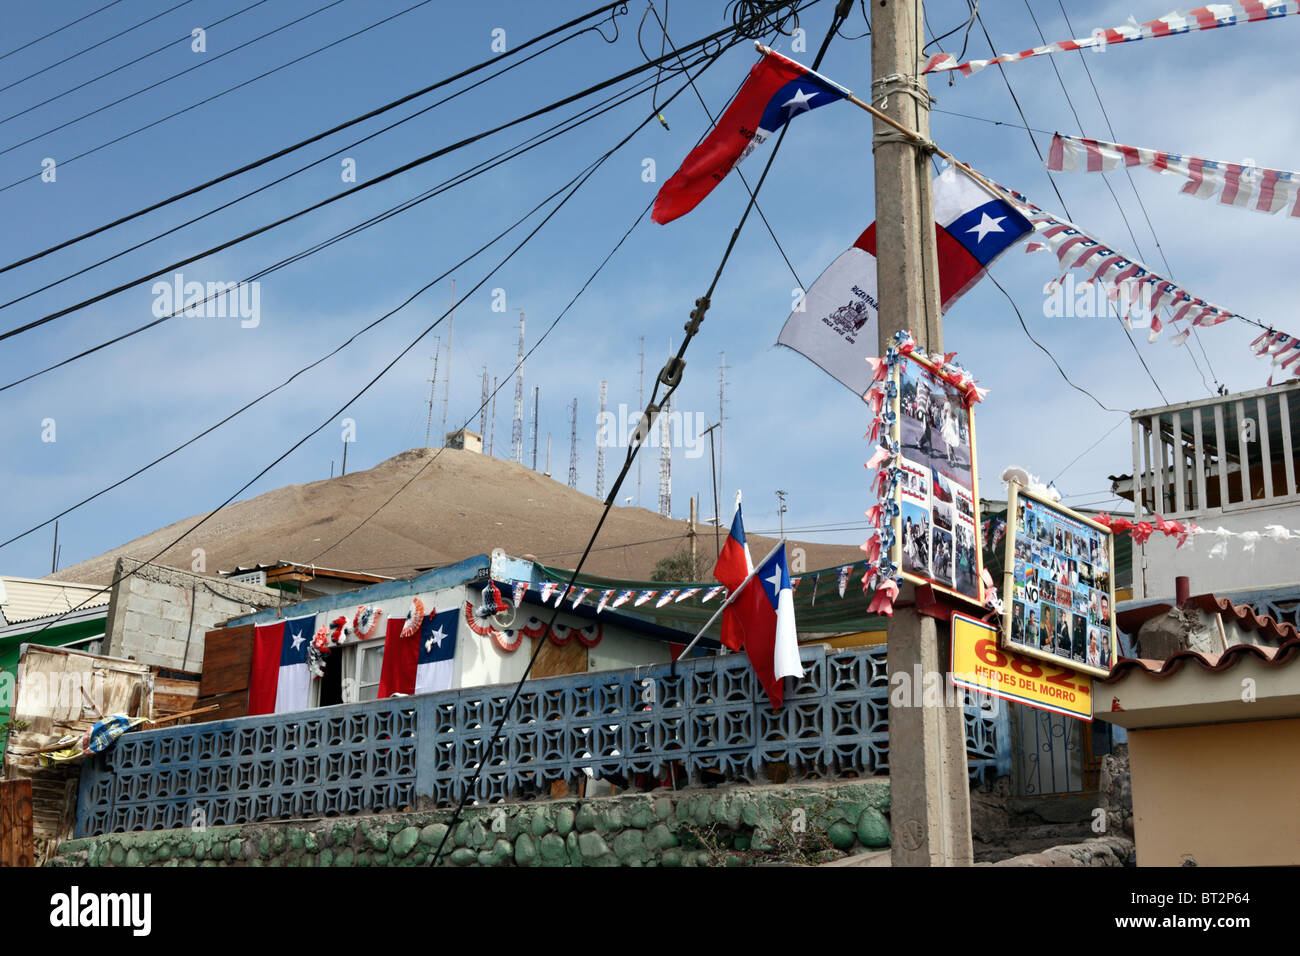 Houses decorated with Chilean flags for the bicentenary of the establishment of the First Government Junta of Chile on 18th September 1810, Arica Stock Photo